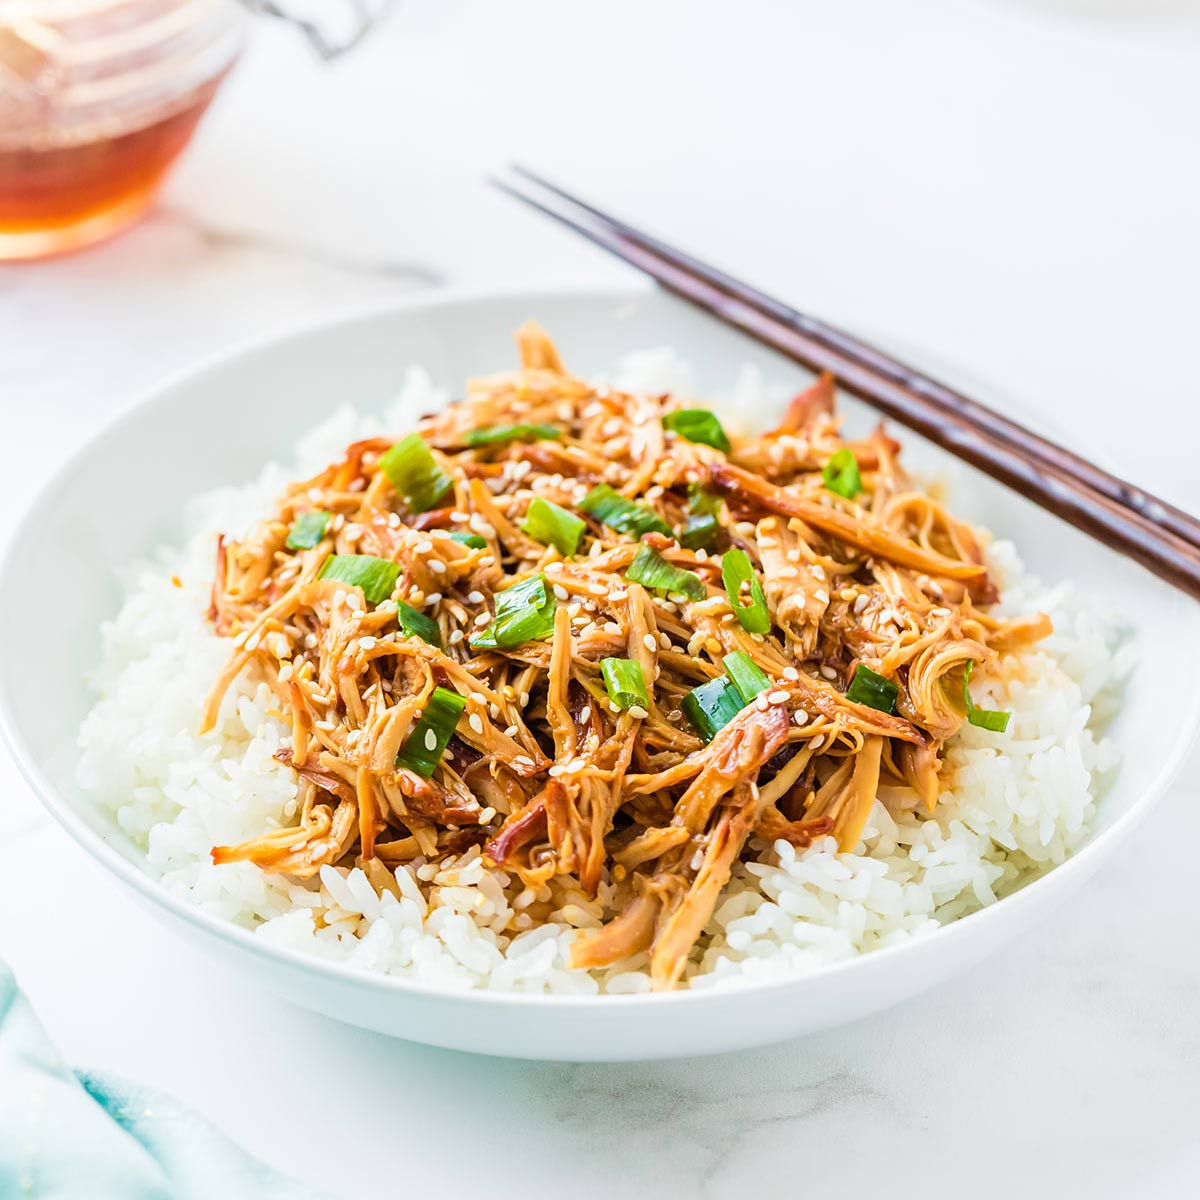 Honey Sesame Chicken cooked and served on a bed of white rice, garnished with toasted sesame seeds and sliced green onions.